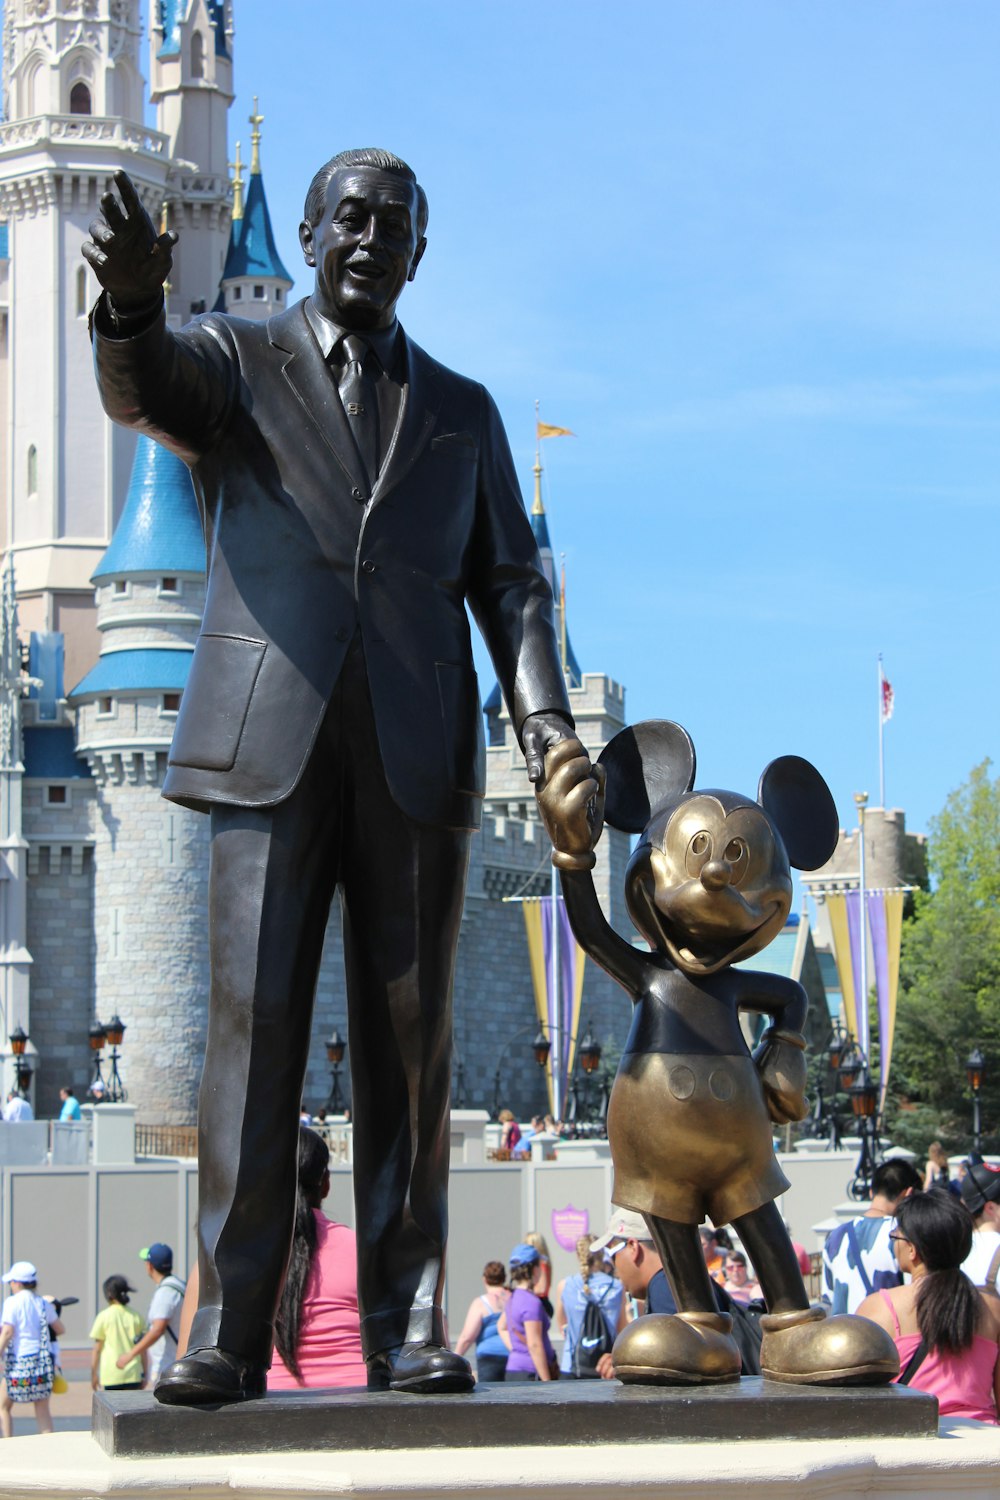 man in black suit standing beside man statue during daytime